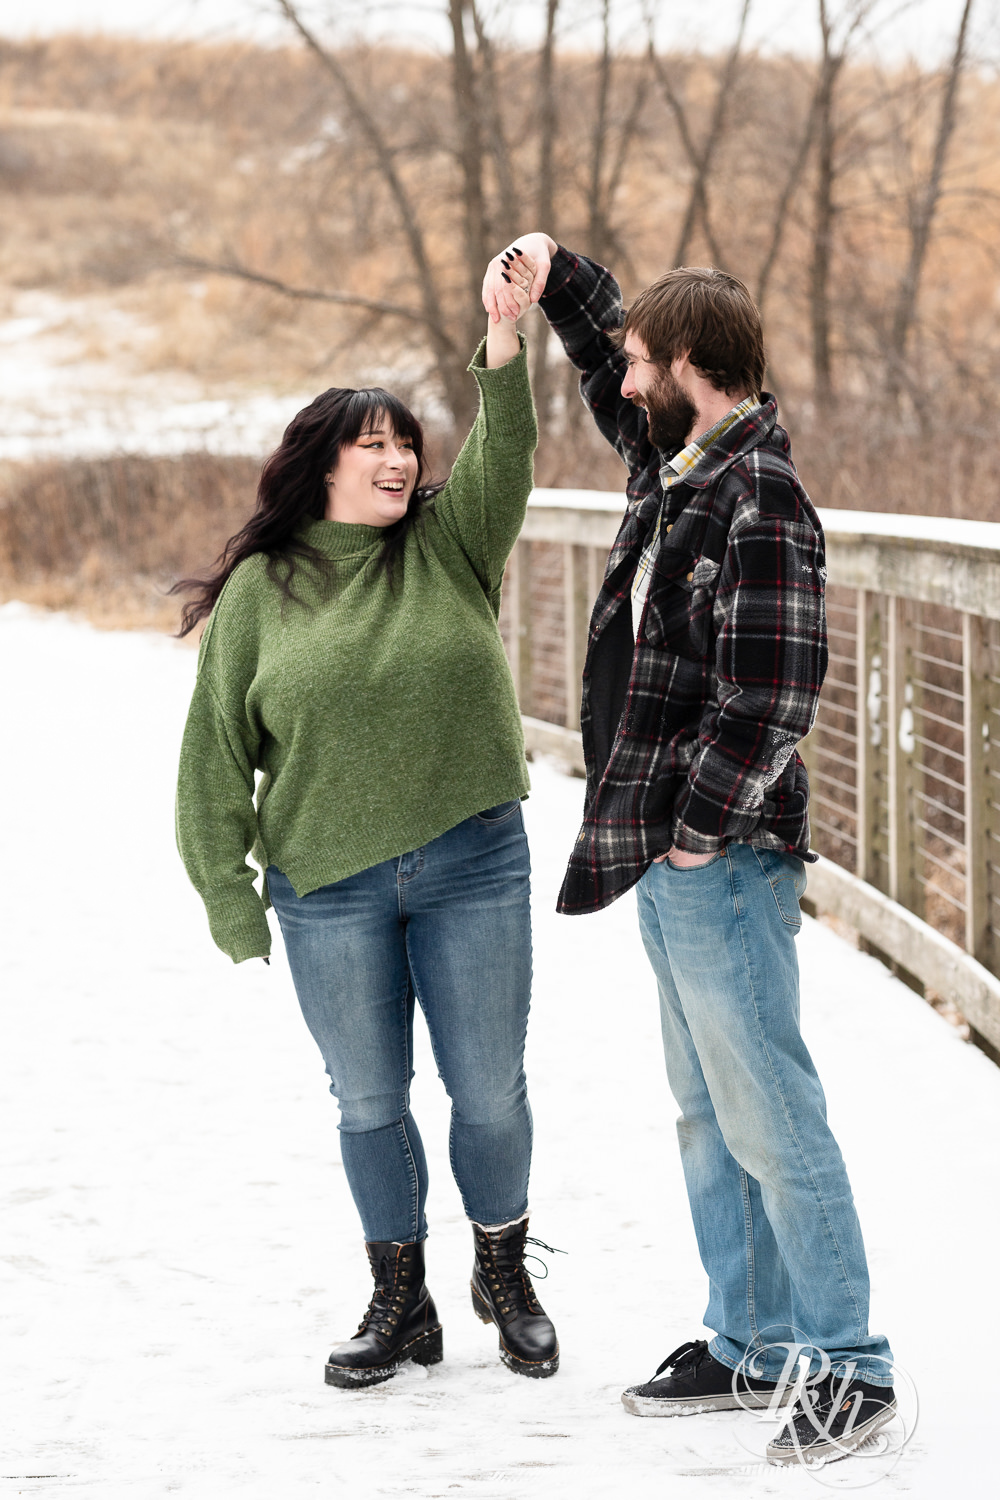 Man in flannel and woman in green sweater and jeans dance snowy bridge at Lebanon Hills in Eagan, Minnesota.